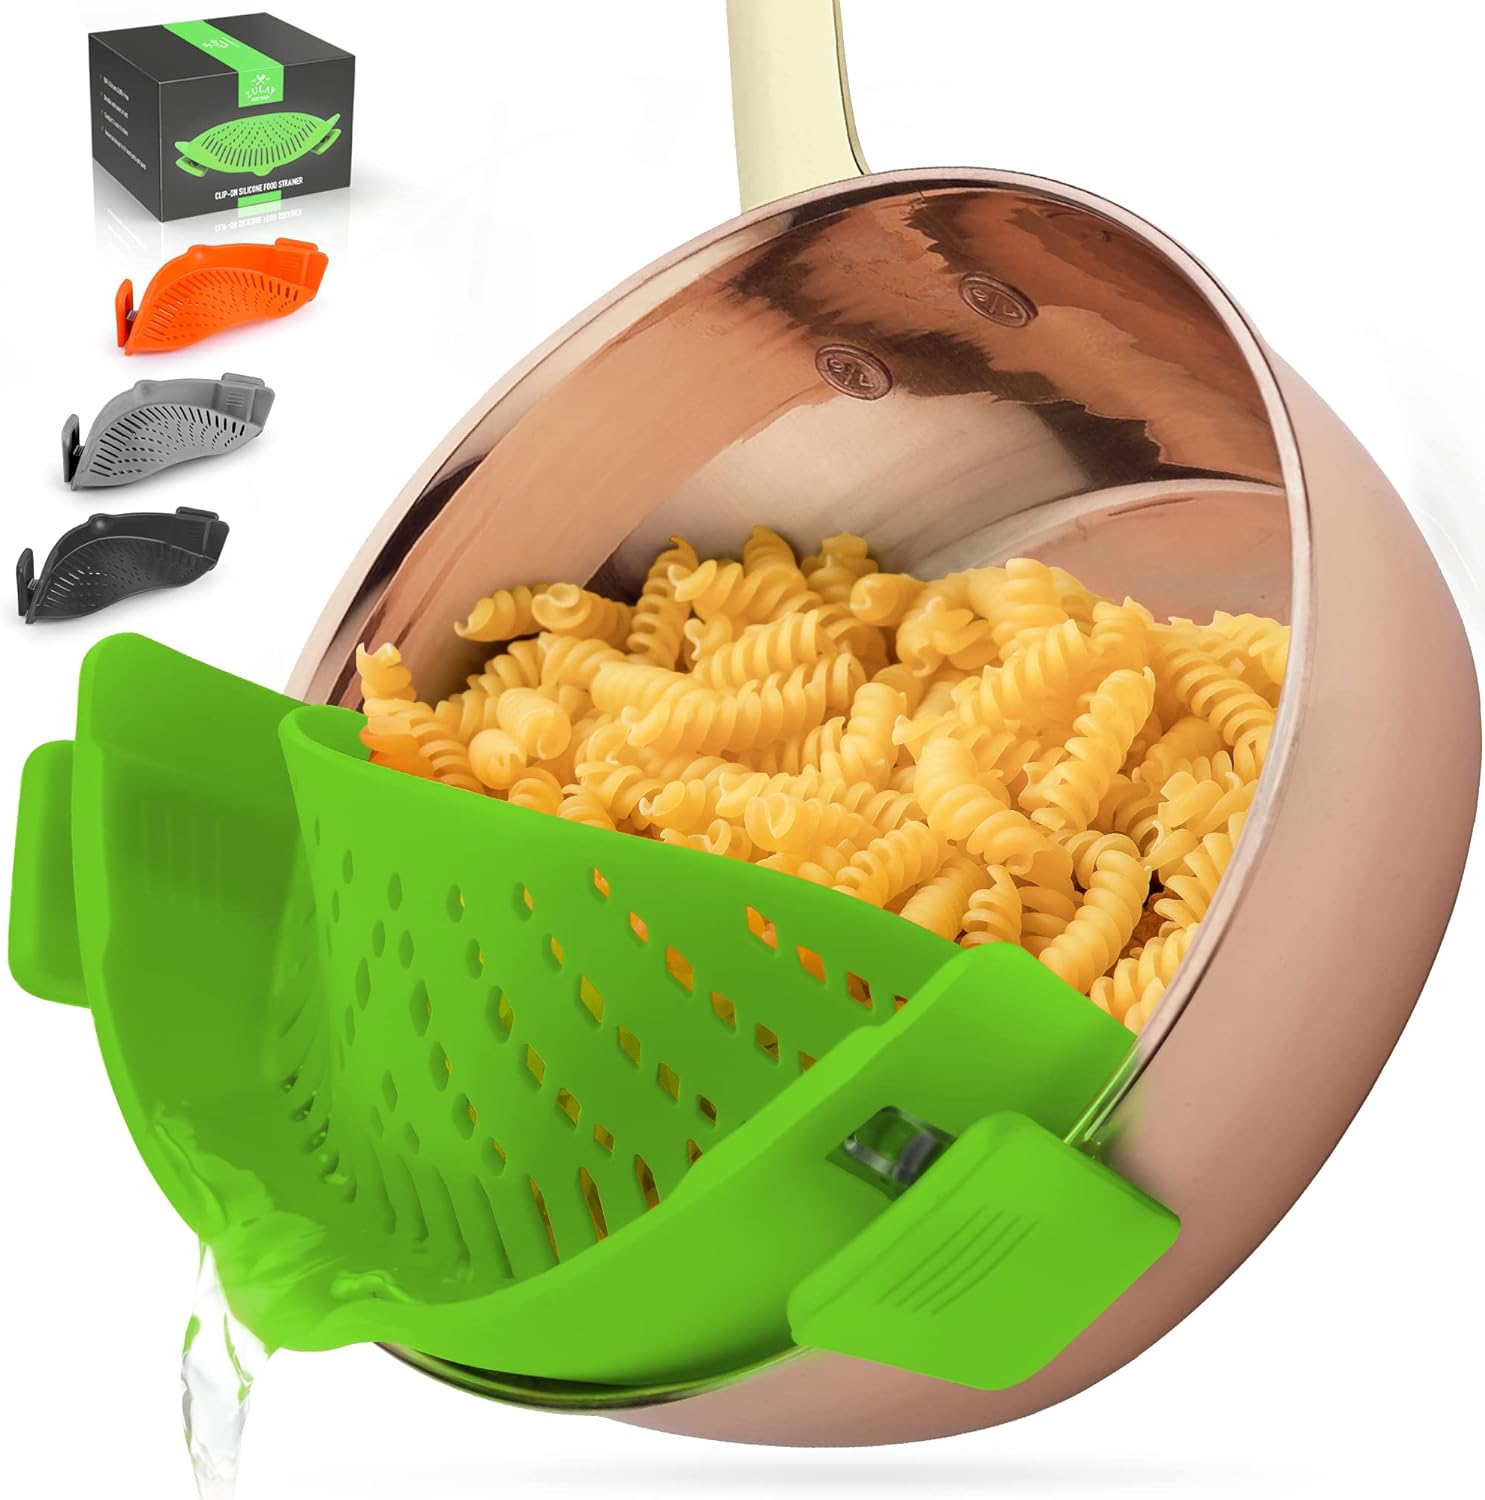 Silicone Pot Strainer by Zulay Kitchen